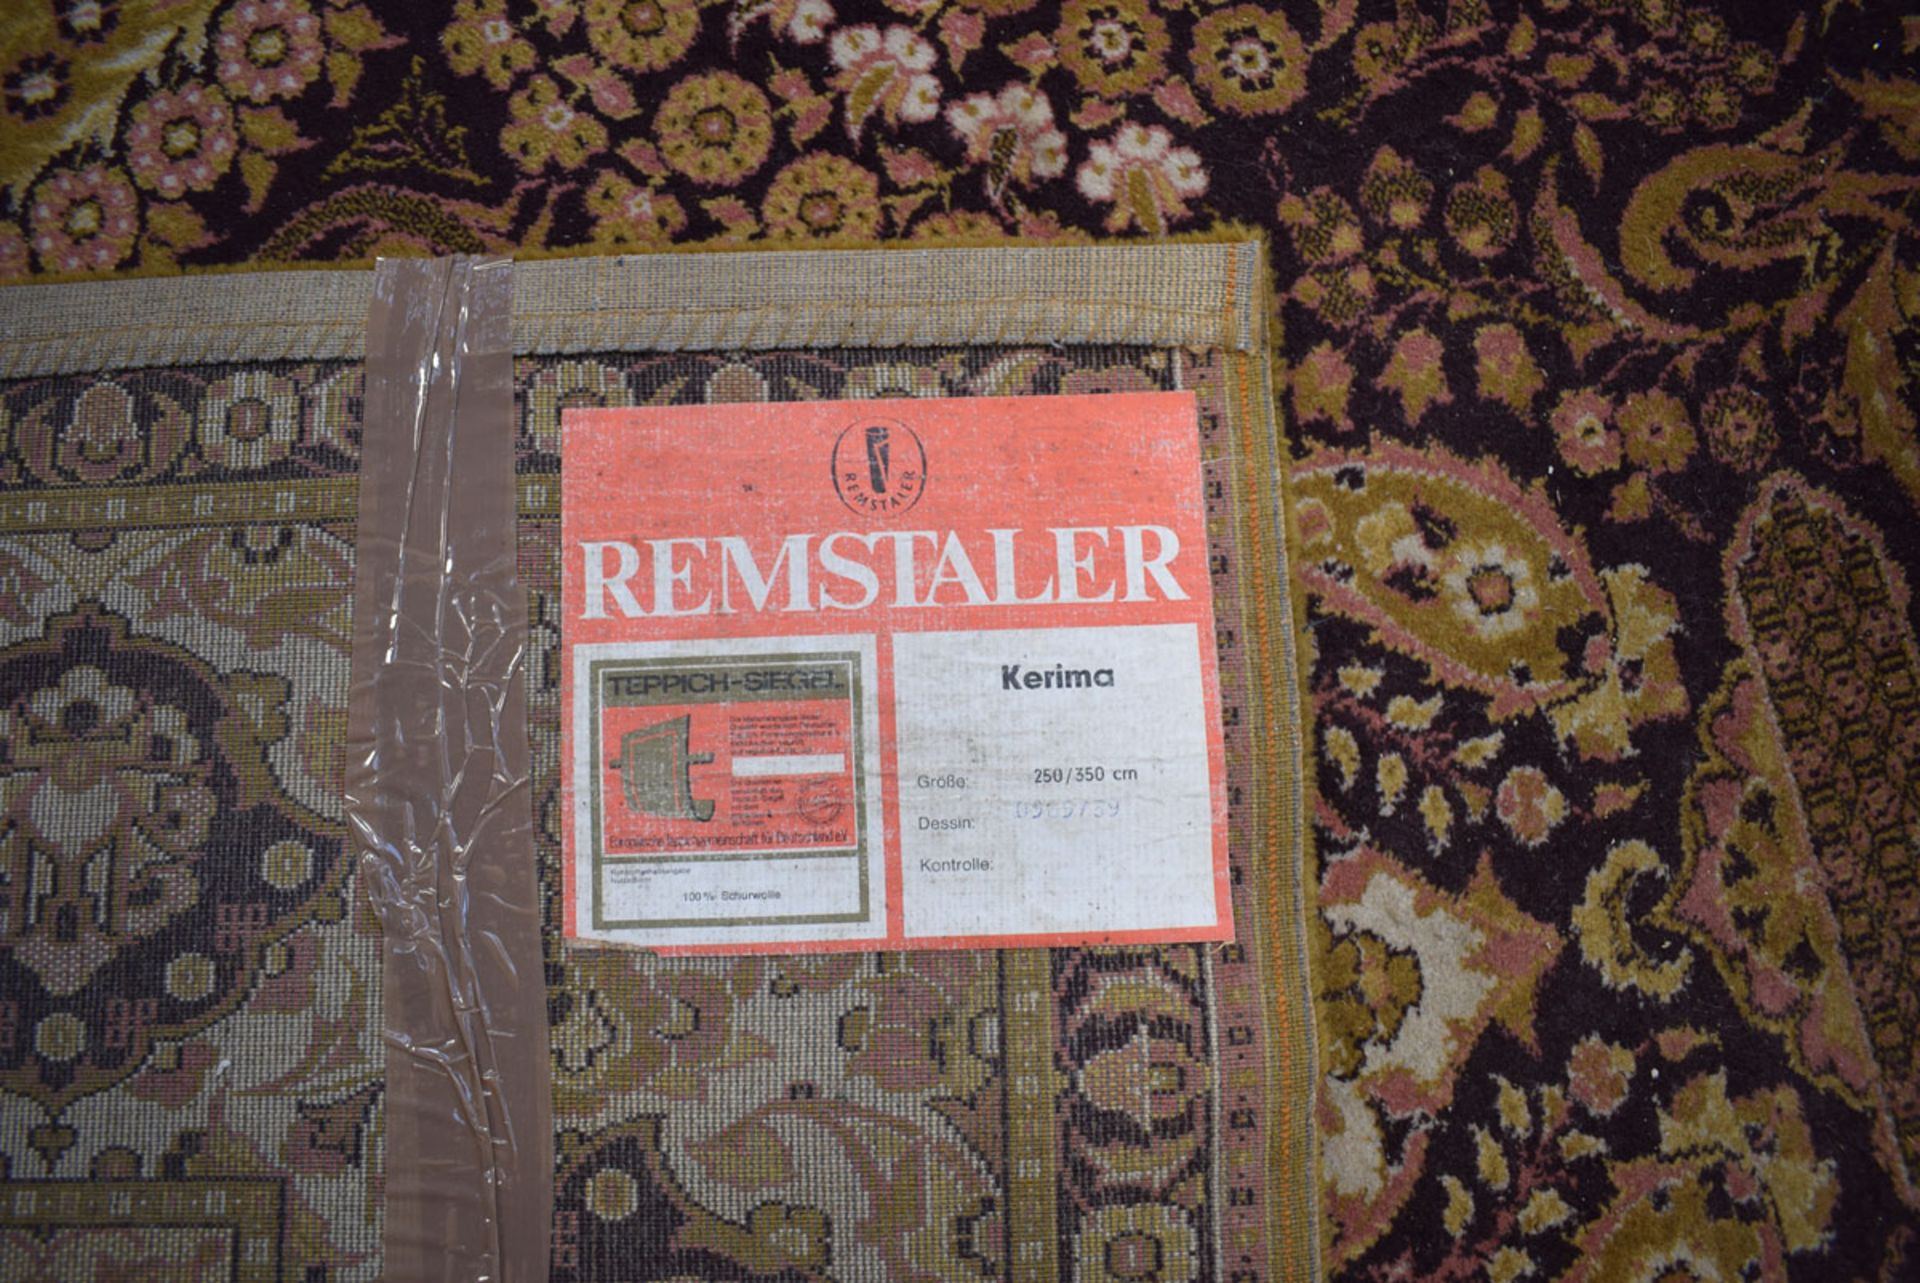 5157 (12) Remstaller Kerima carpet in brown and mustard approx. 2.5 x 3.5m - Image 3 of 4